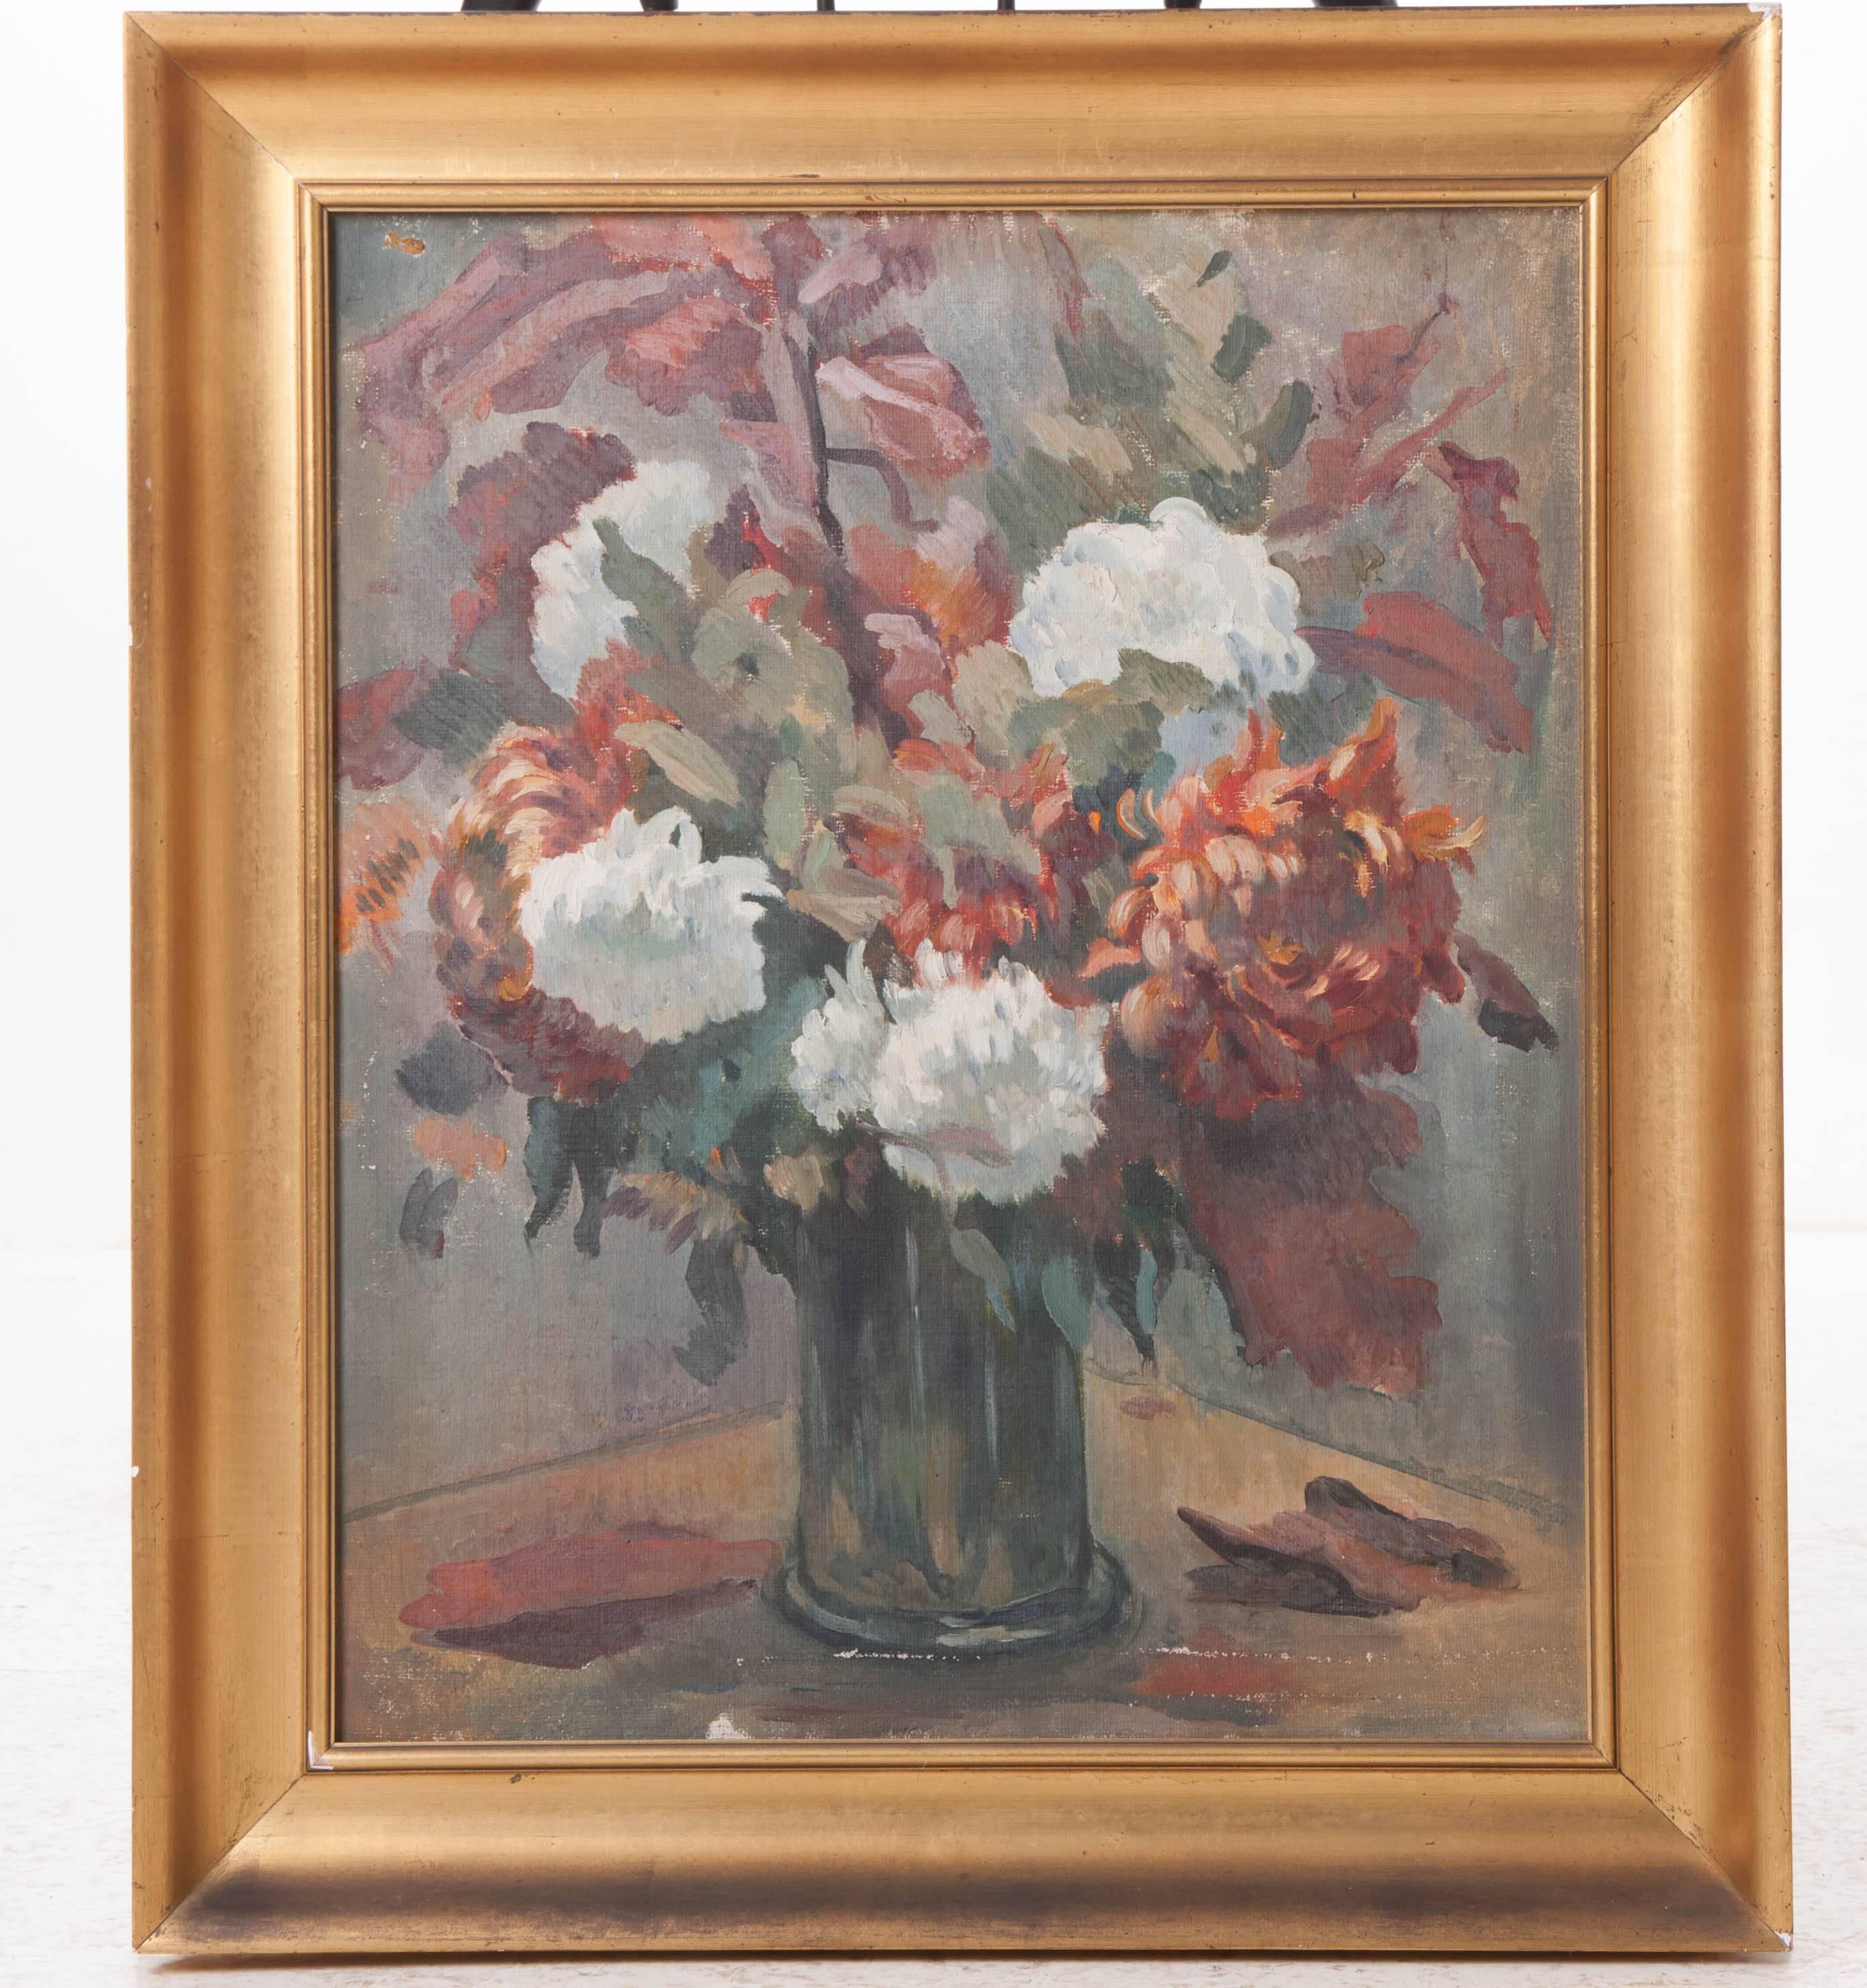 Oil on canvas. Heavily textured, paint-laden brush strokes create depth and definition among the petals of each flower depicted in this beautiful French still life. The warmer colors found in the painting are accentuated in the warm gold gilt frame.